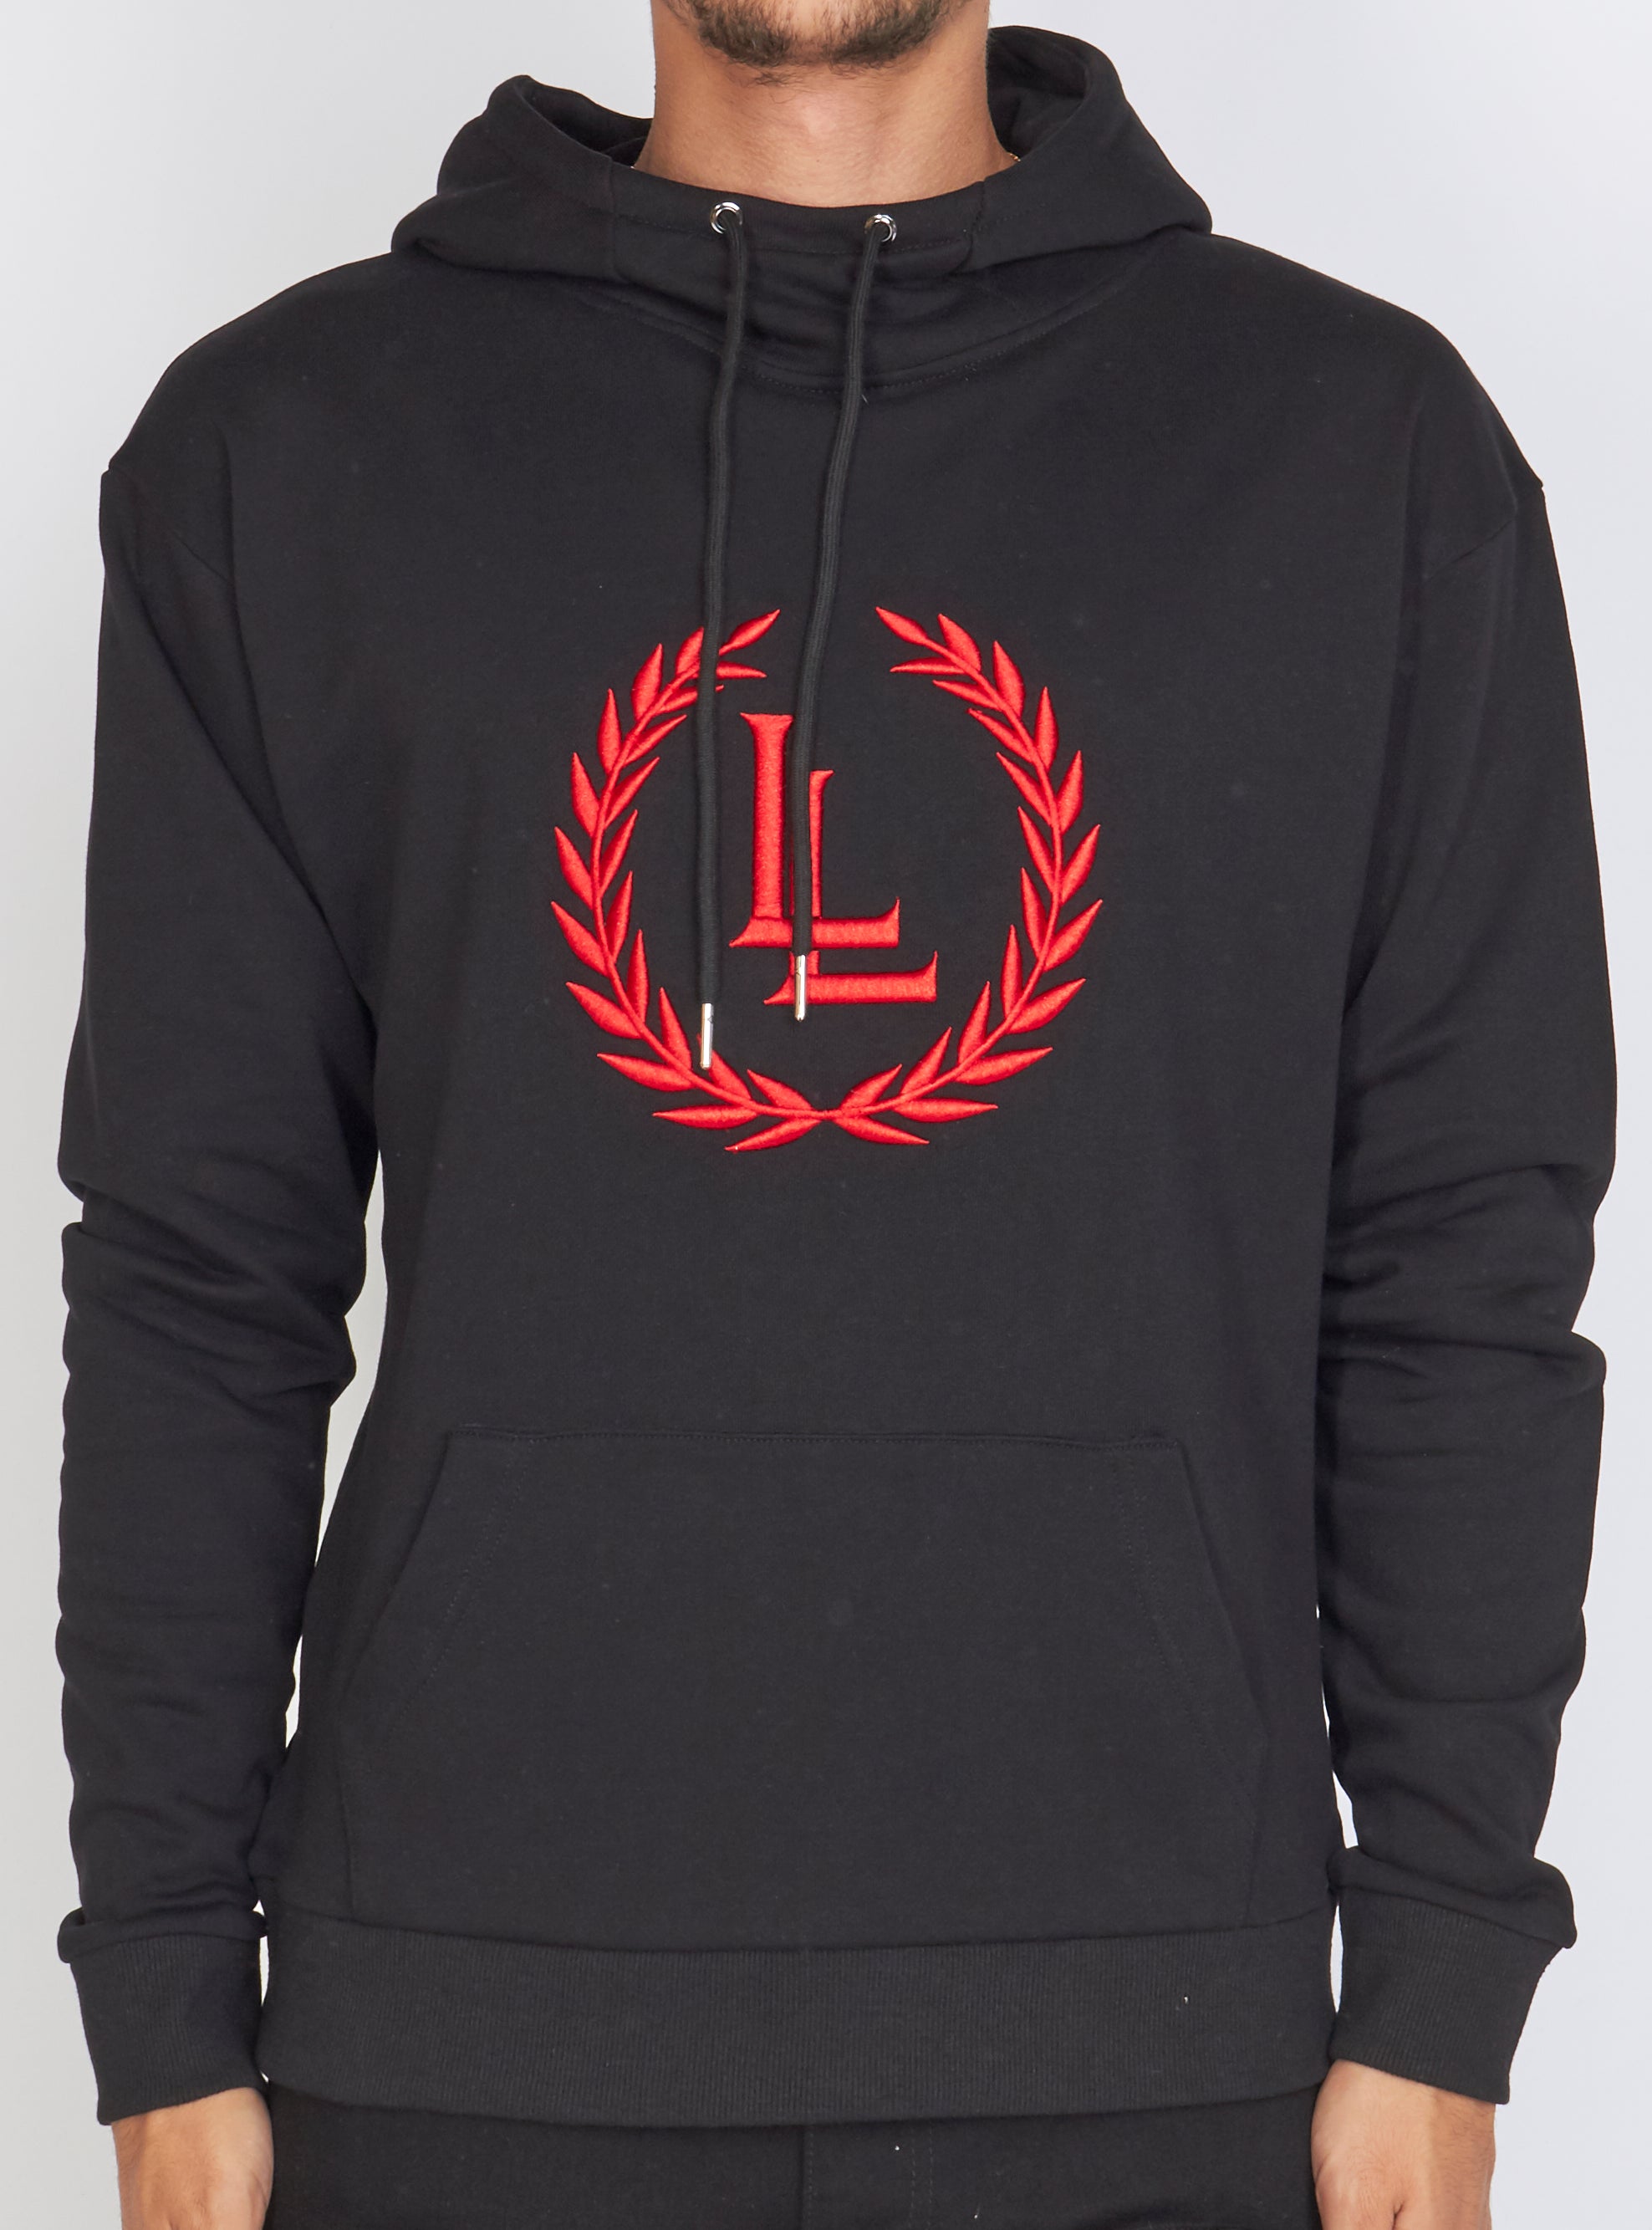 Hoodie - Crest Pullover - Black and Red - LLCH601